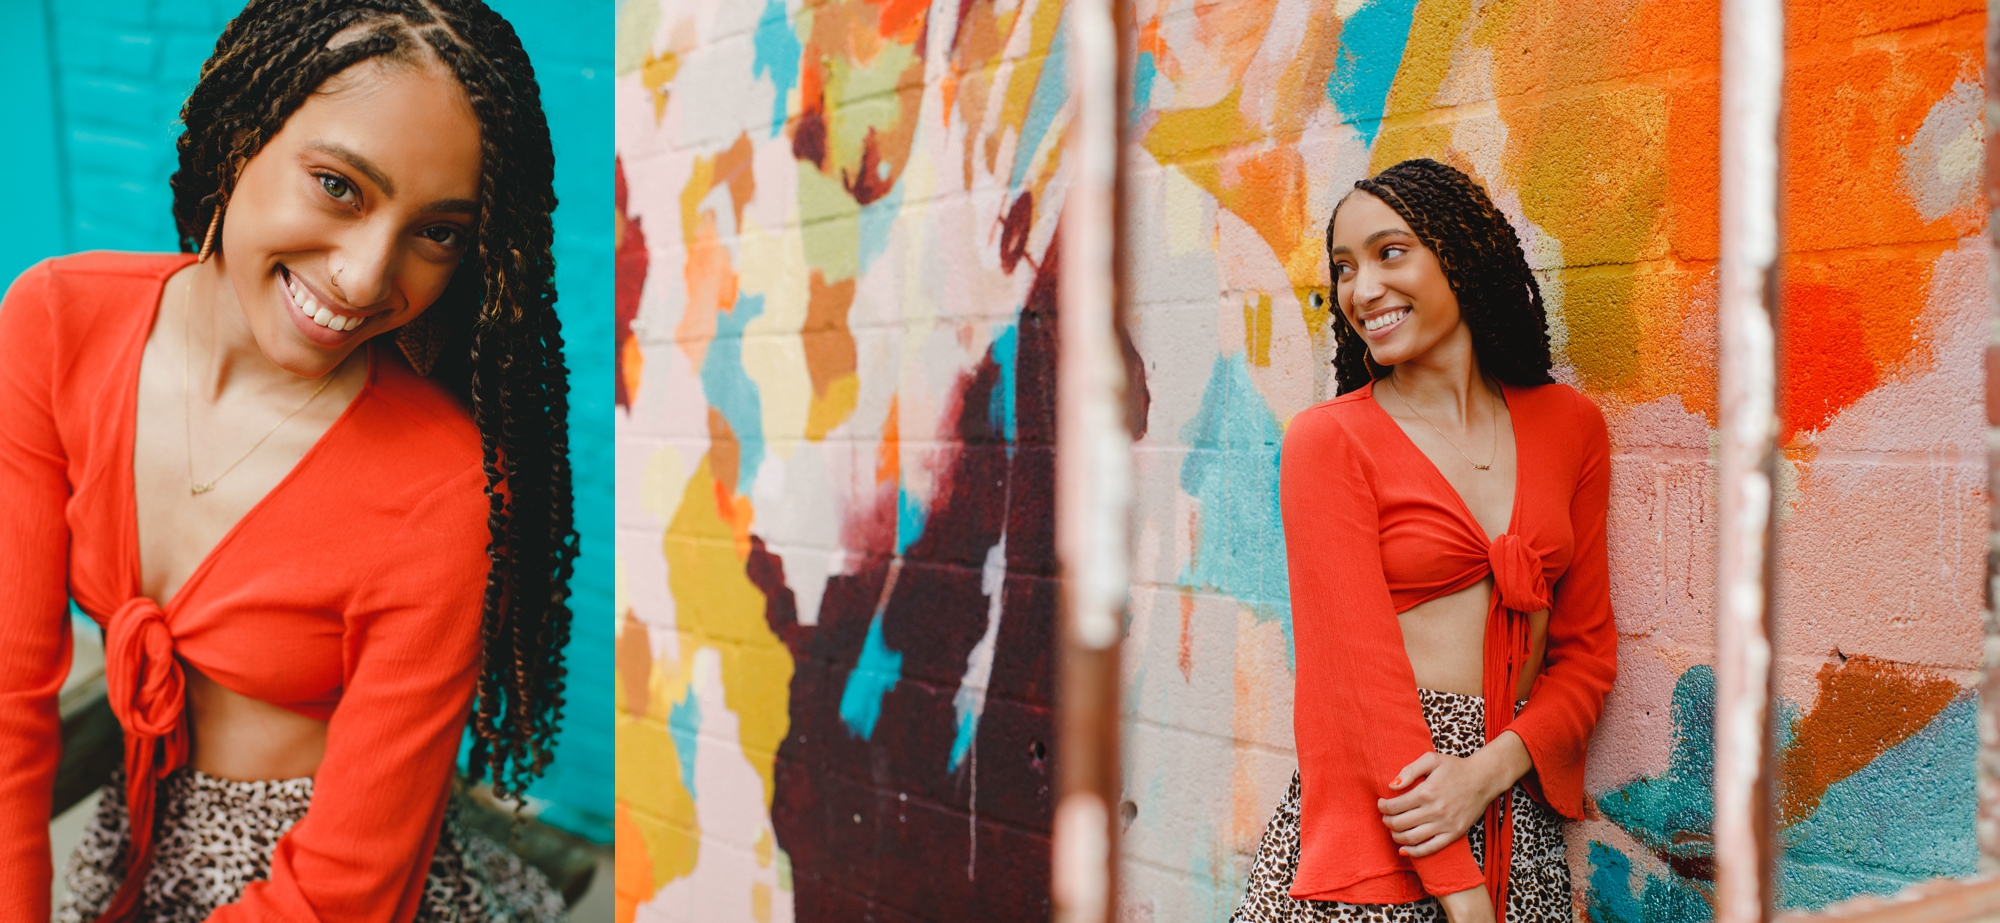 Various shots of Alize in the red top in front of a bright brushstroke mural.